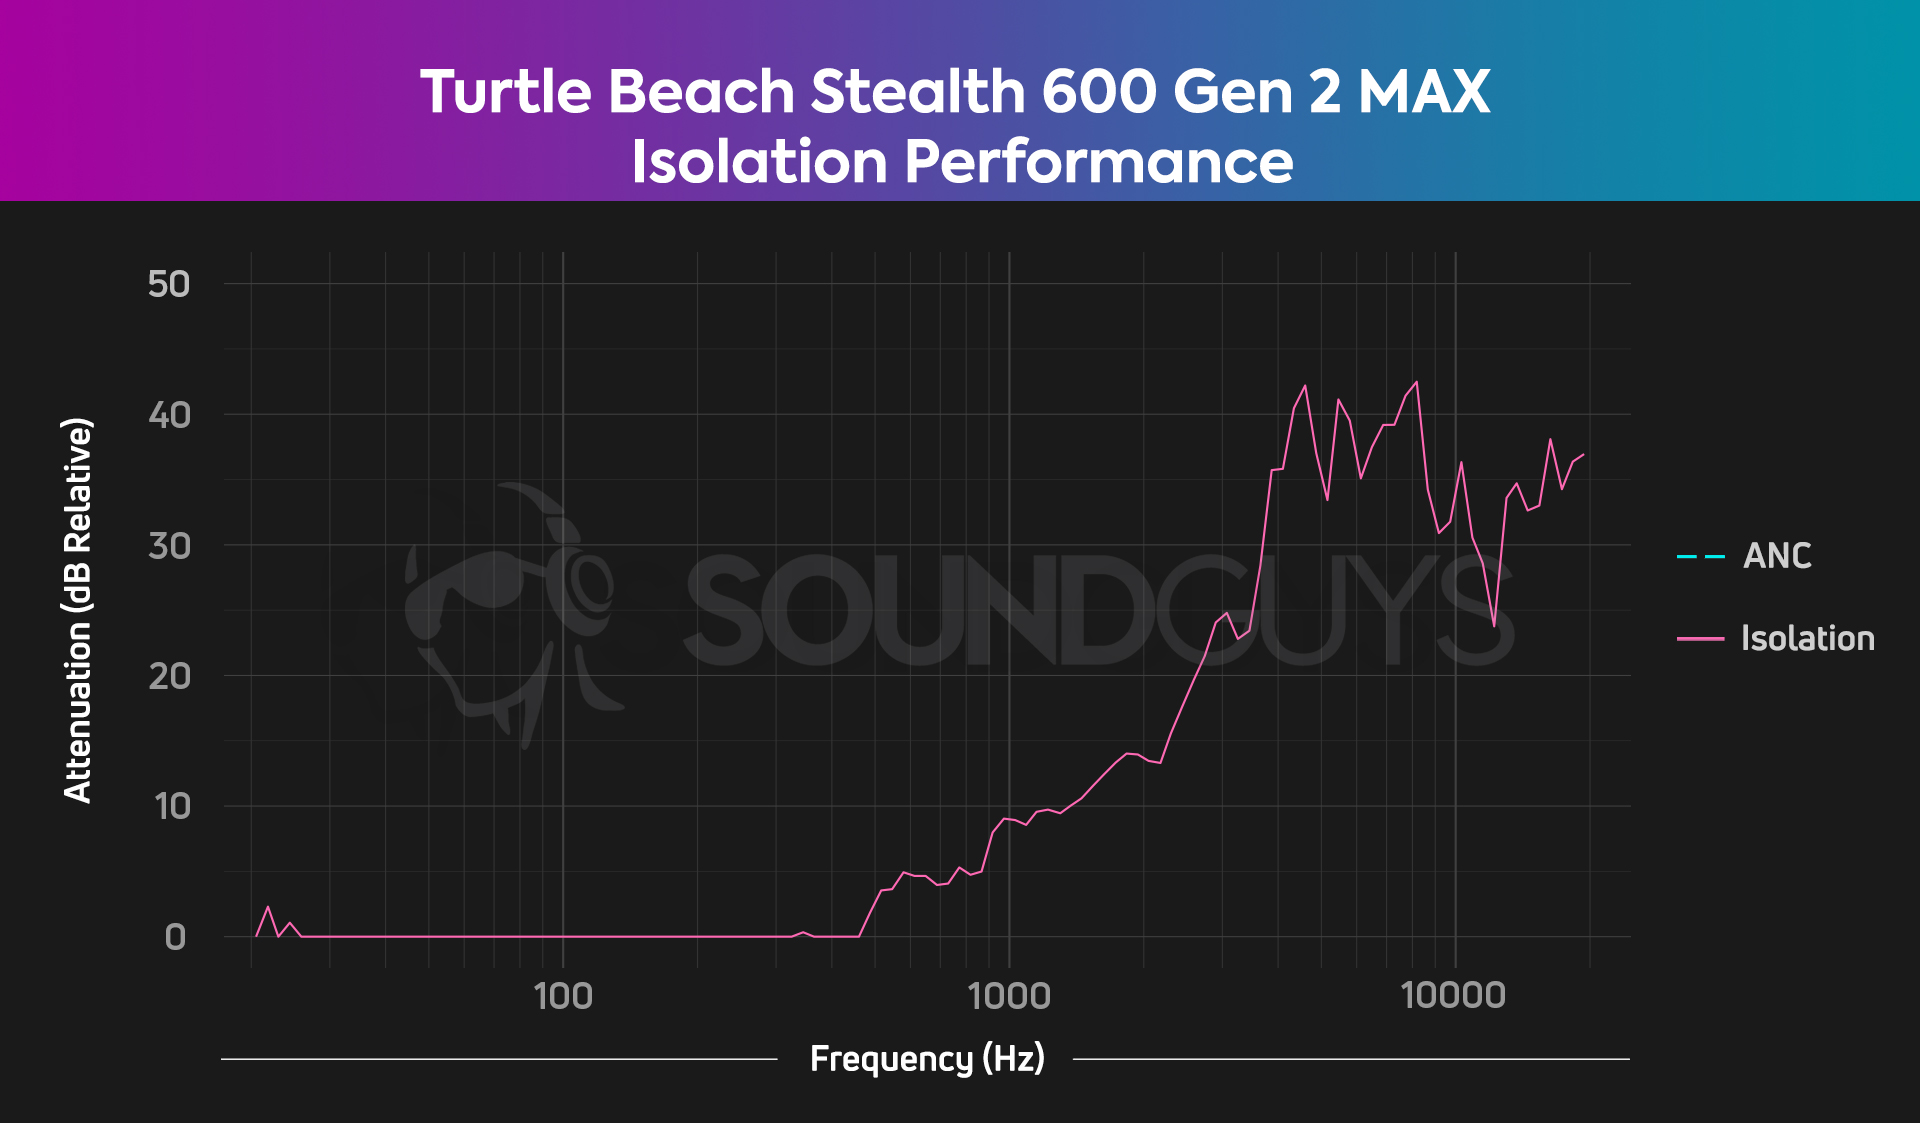 An isolation chart for the Turtle Beach Stealth 600 Gen 2 MAX gaming headset, which shows pretty average attenuation.